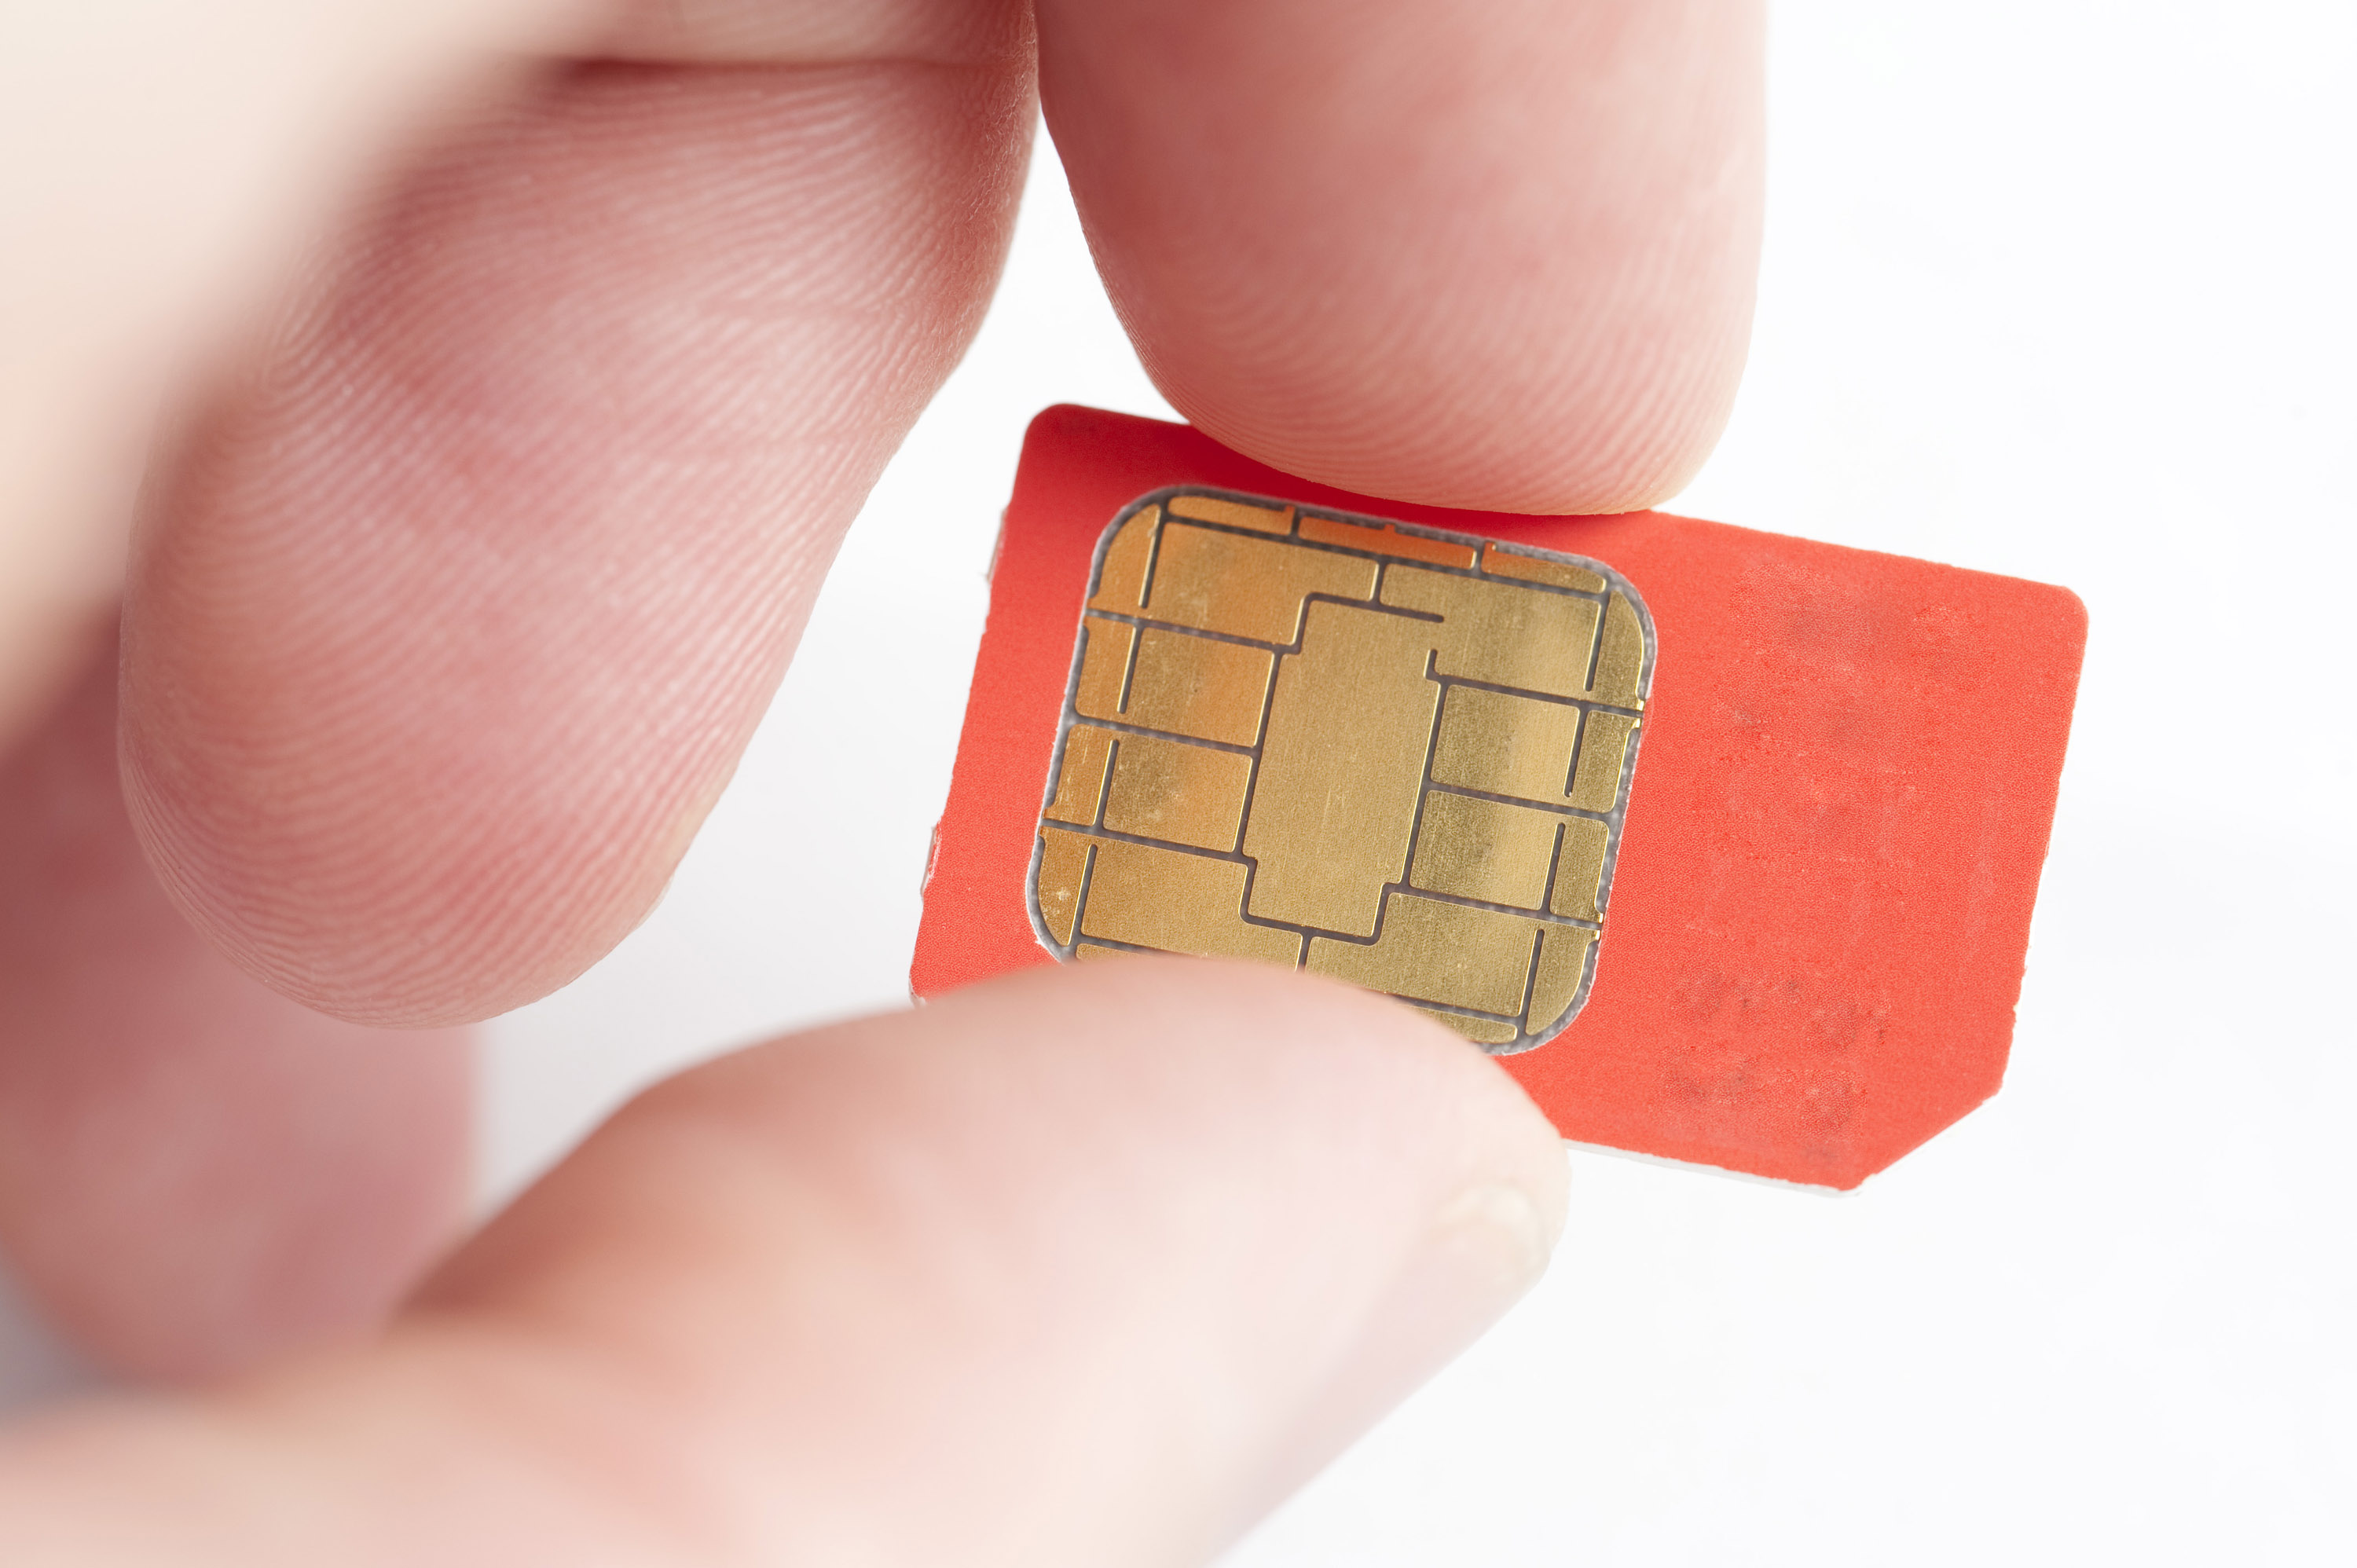 sim chip-2902 | Stockarch Free Stock Photo Archive